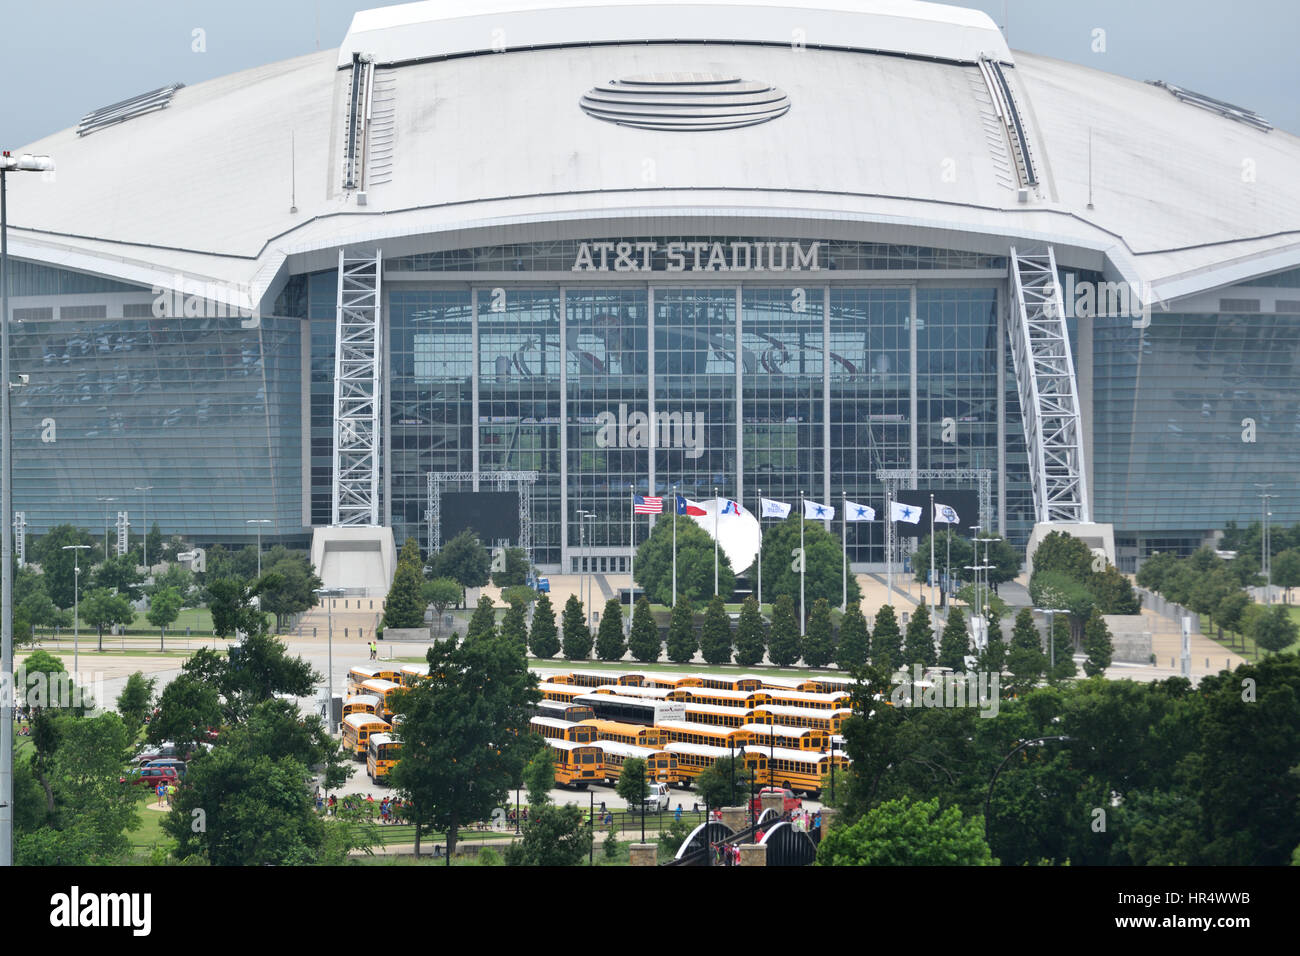 AT&T Stadium (Home of the Dallas Cowboys) Stock Photo